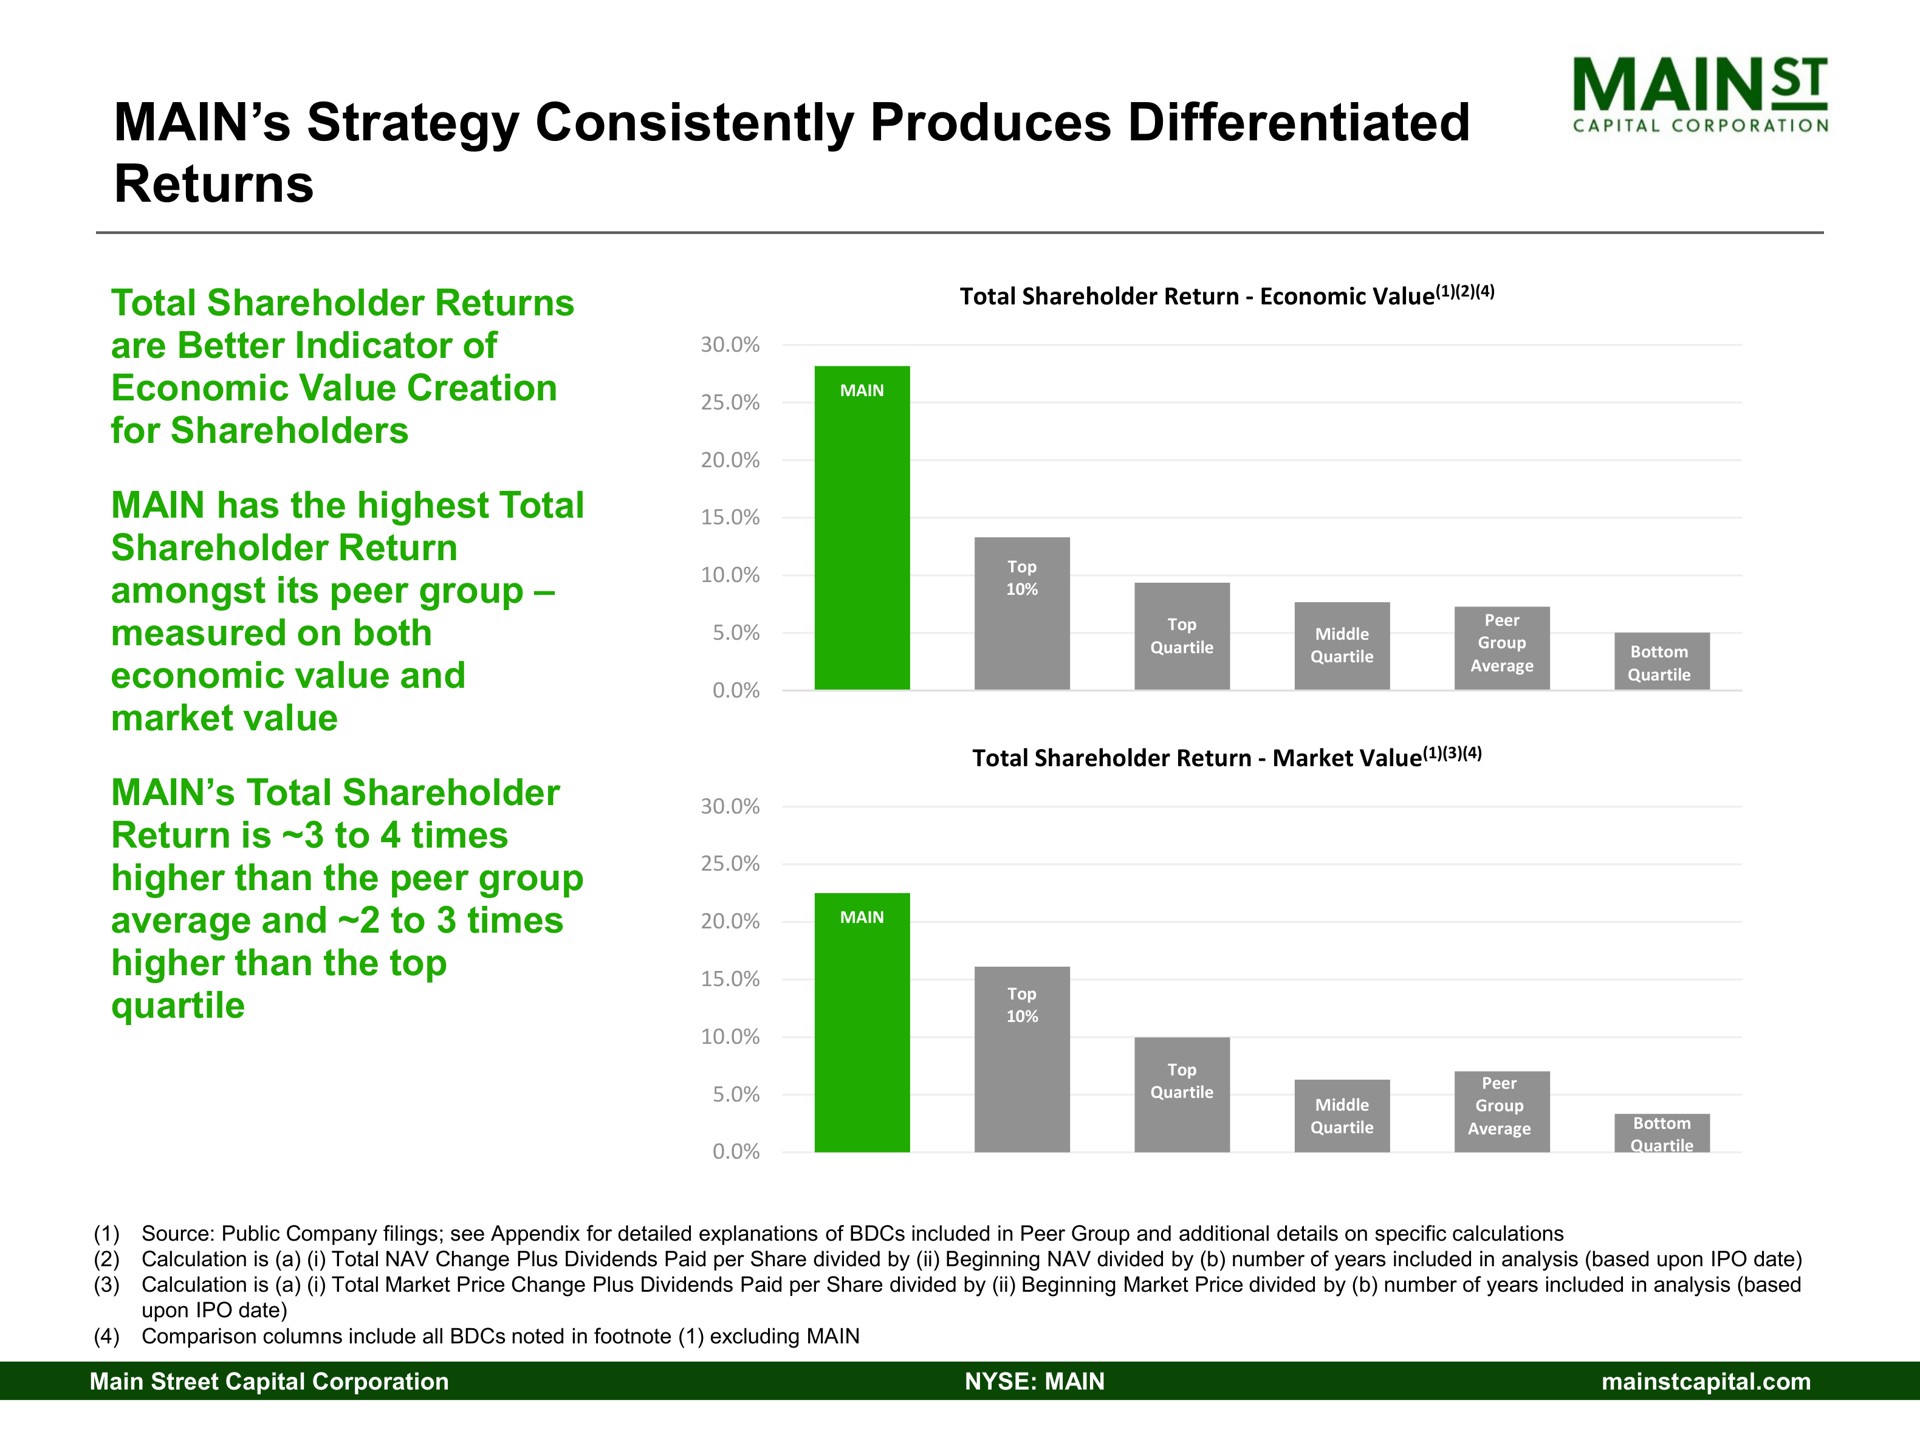 main strategy consistently produces differentiated returns amongst its peer group | Main Street Capital